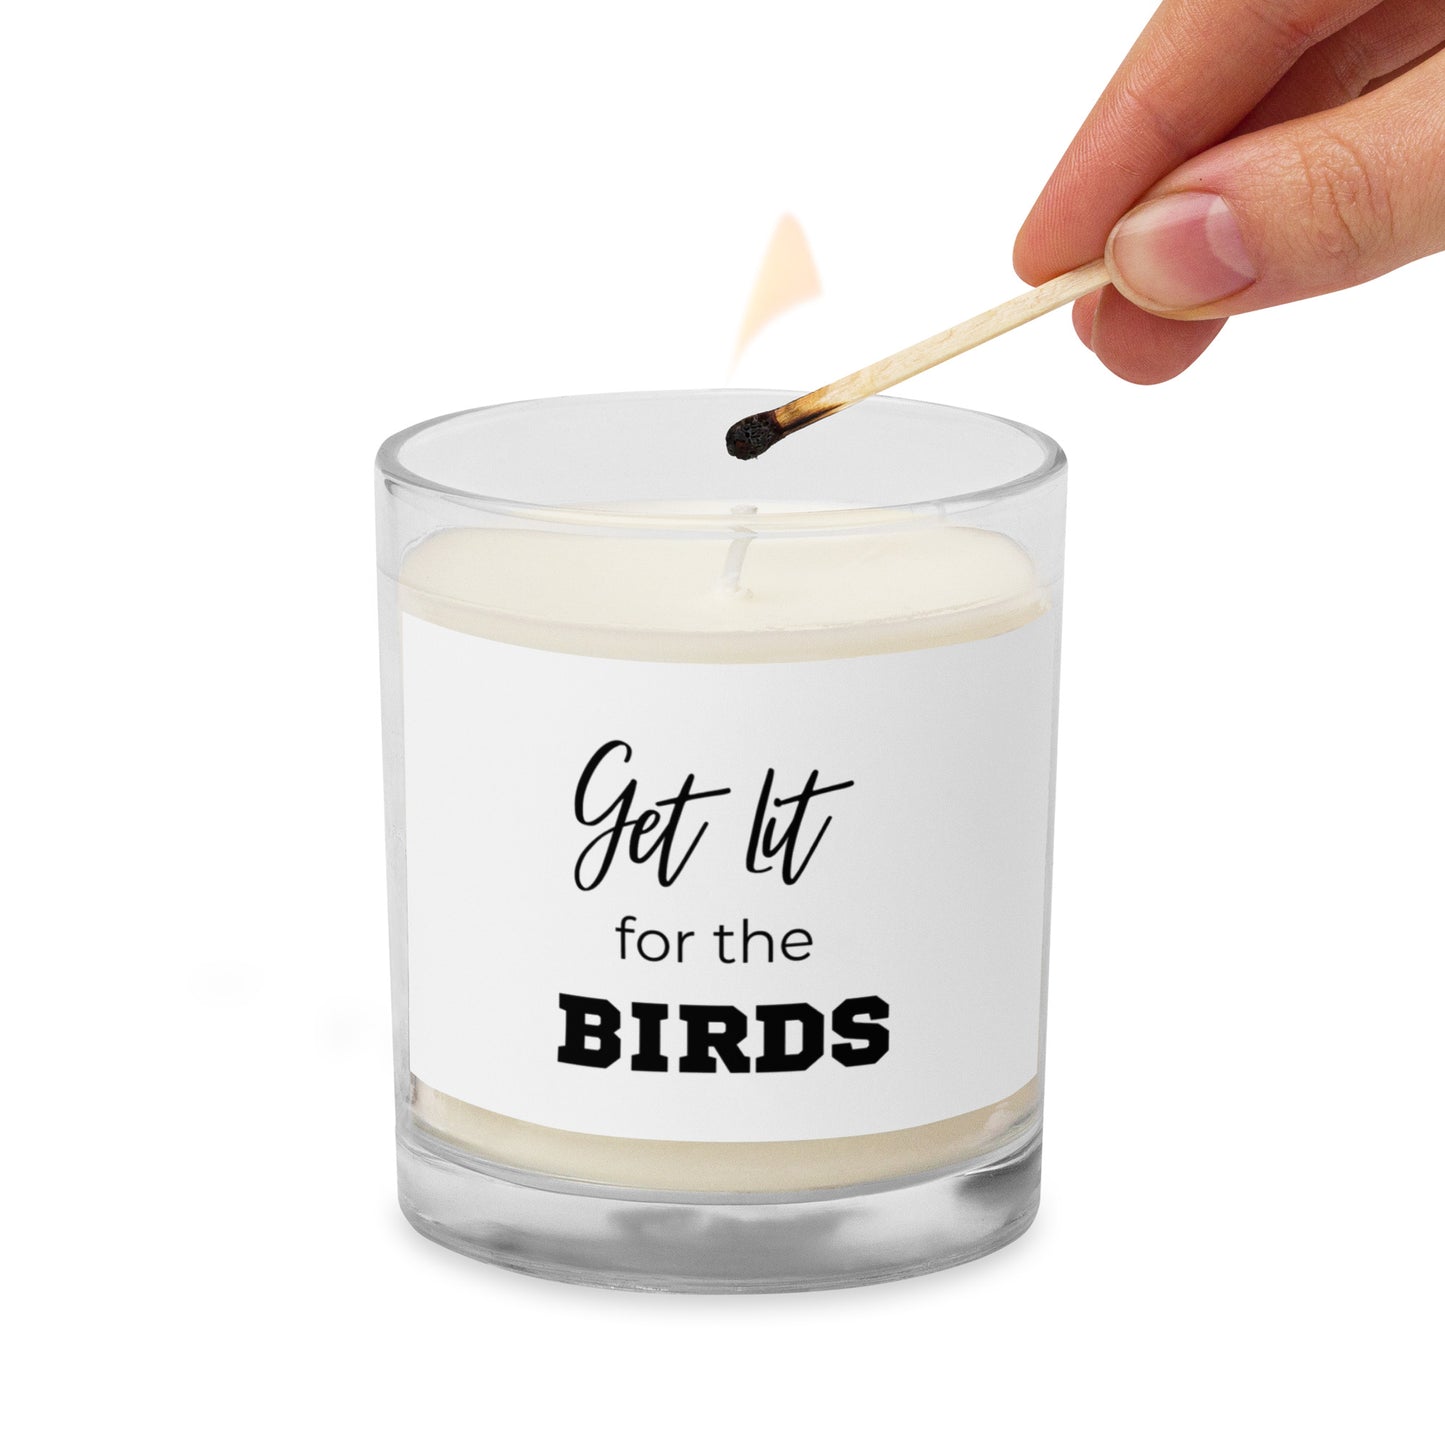 Get lit for the birds Glass jar soy wax candle